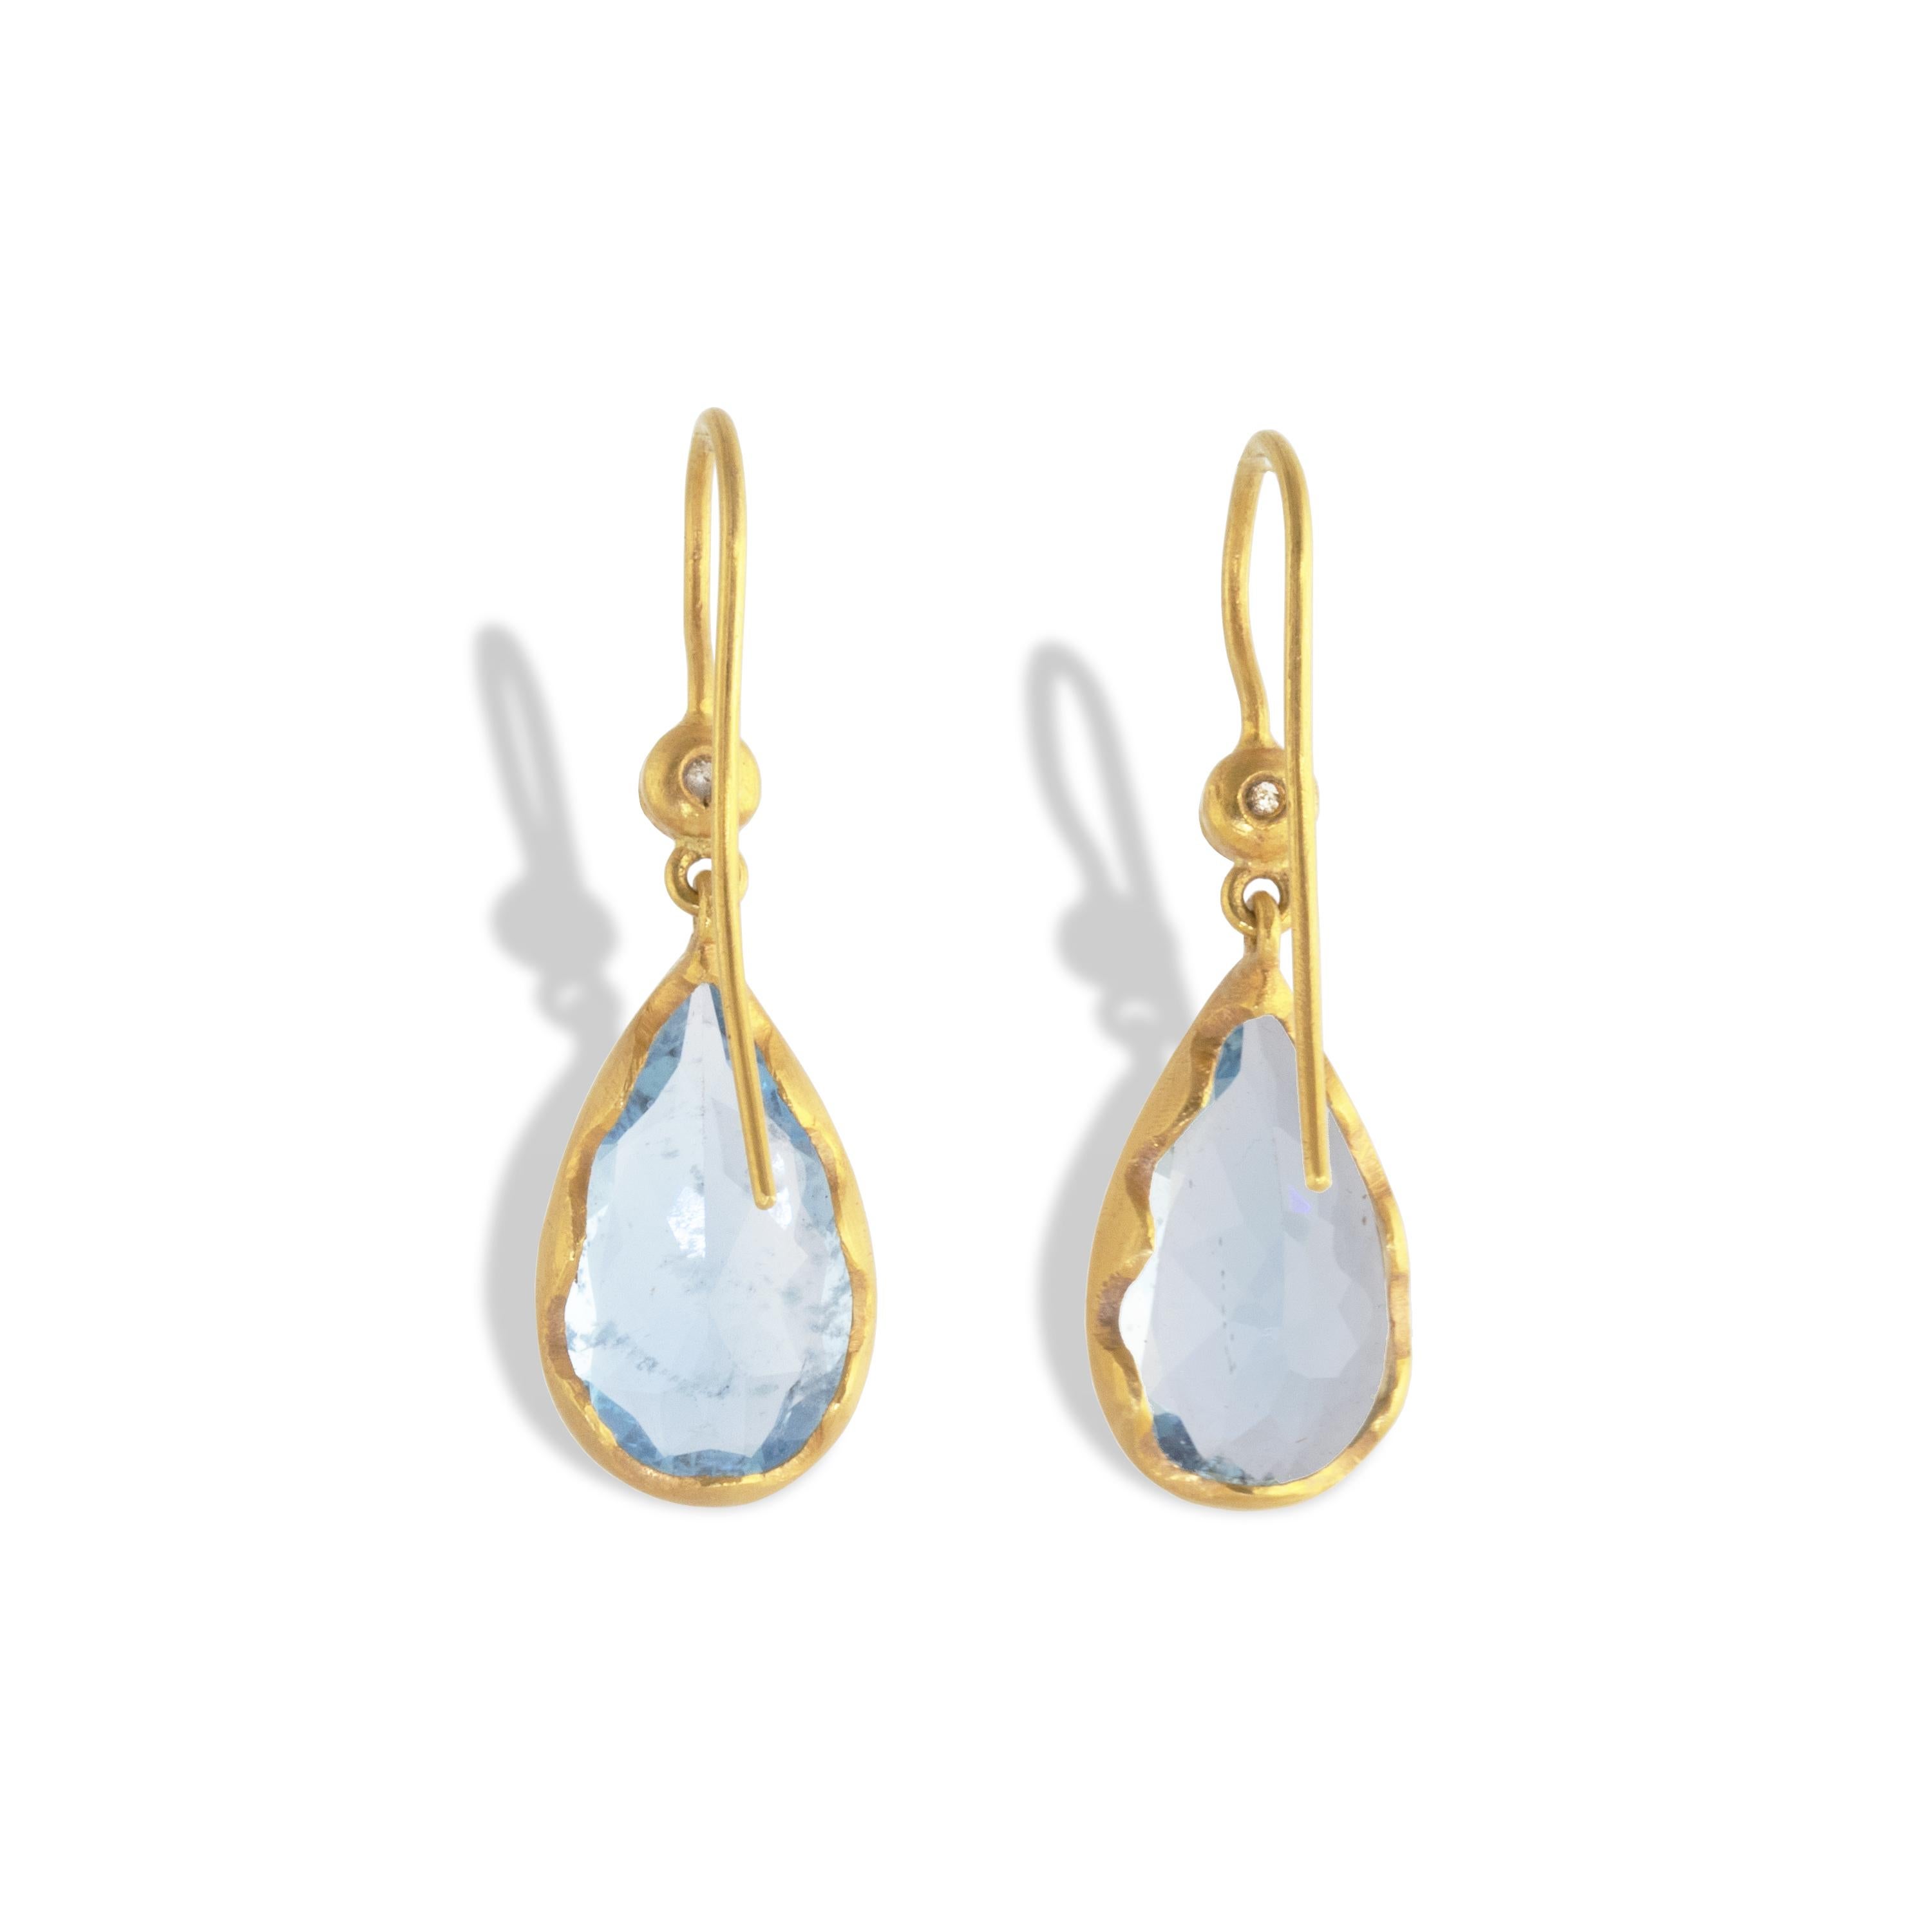 Ico & the Bird Fine Jewelry 5.52 carat Aquamarine Diamond Wave Gold Earrings In New Condition For Sale In Los Angeles, CA